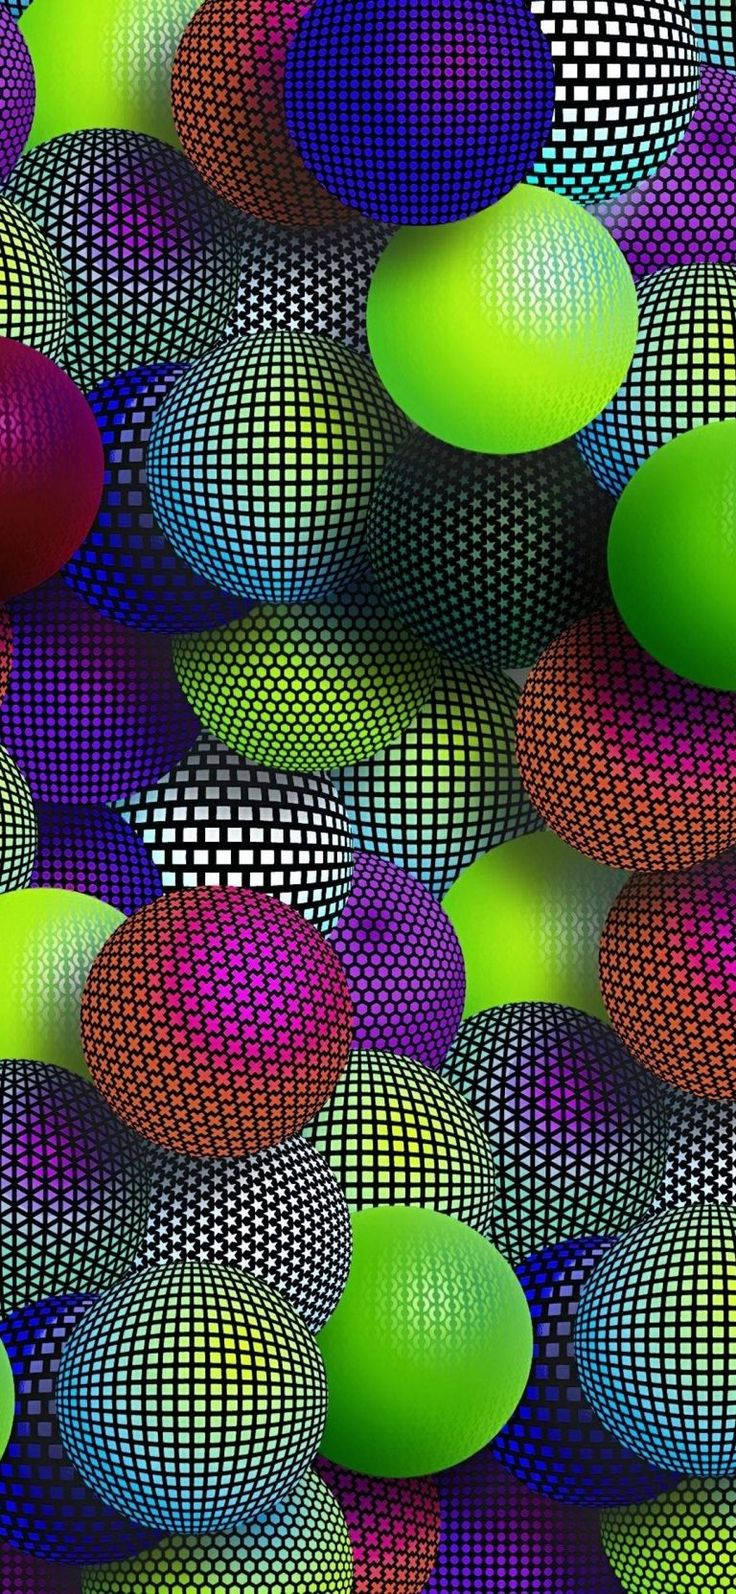 3d Phone Stacked Colorful Patterned Balls